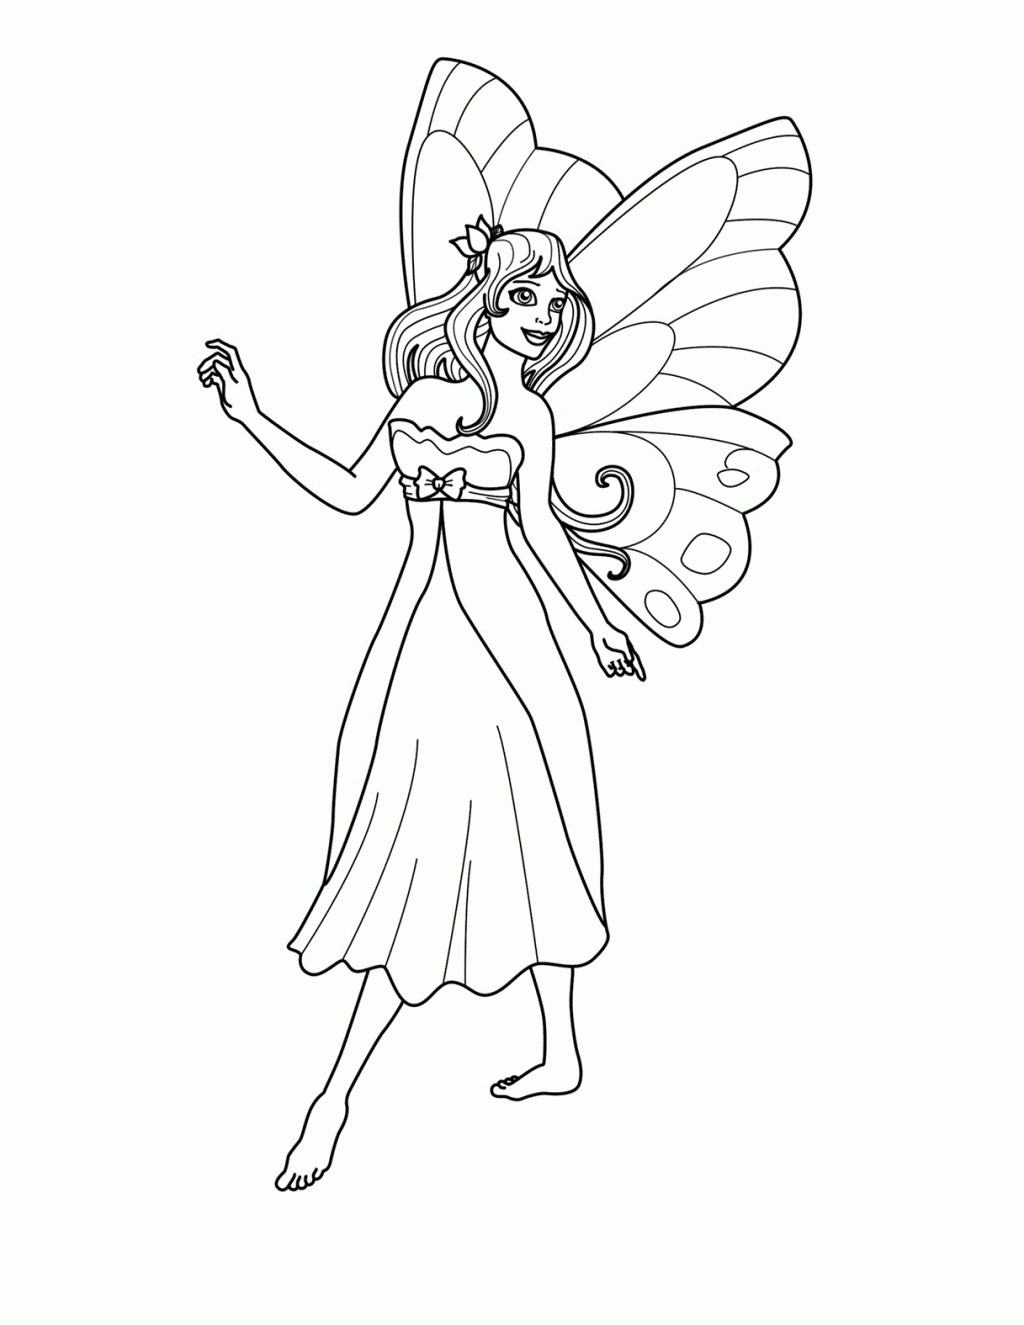 Coloring Pages ~ Disney Fairies Coloring Book Free Printable Fairy - Free Printable Fairy Coloring Pictures